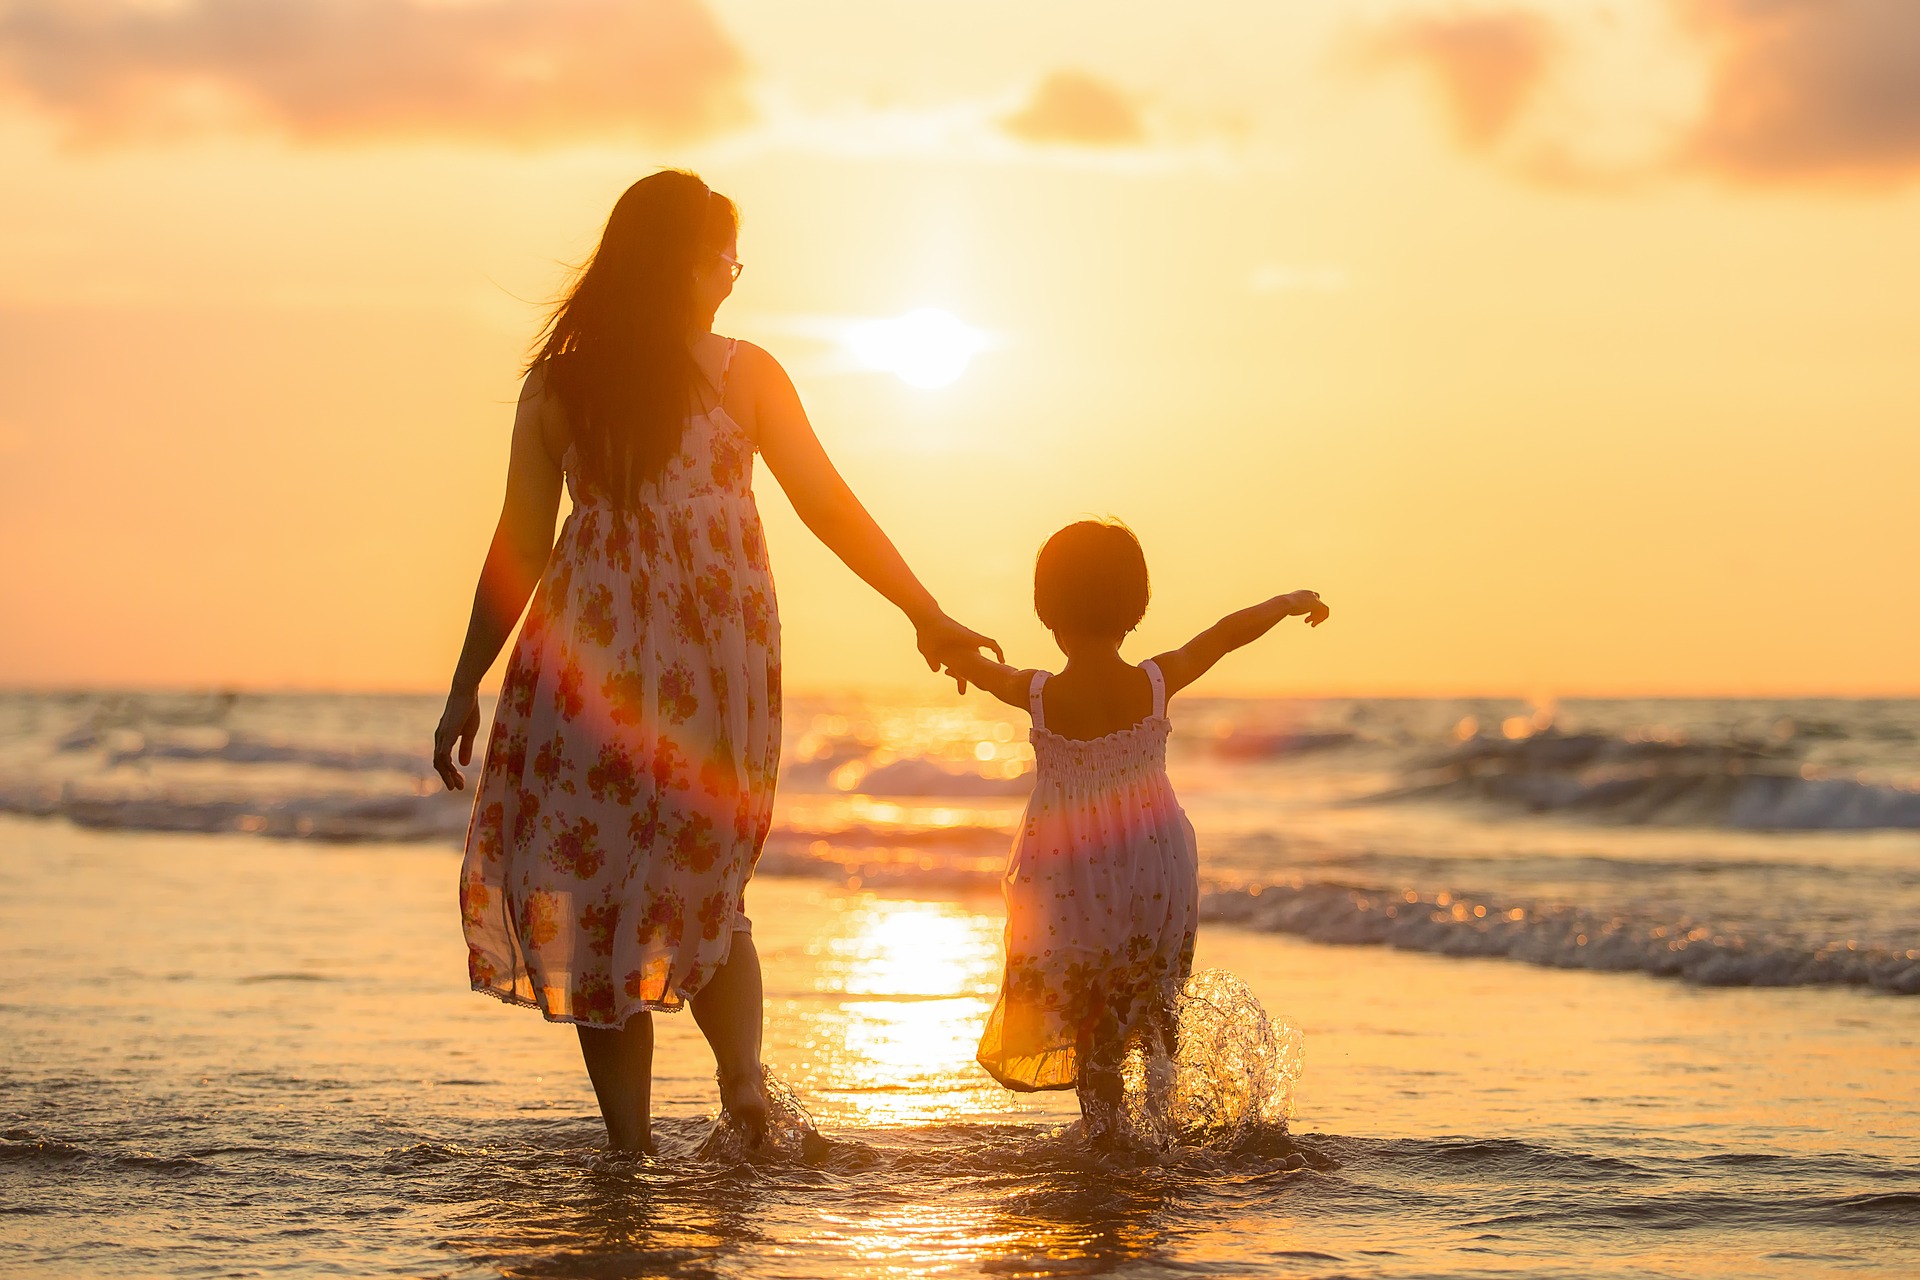 Mother and daughter walking on the beach at sunset | CC via pixabay.com